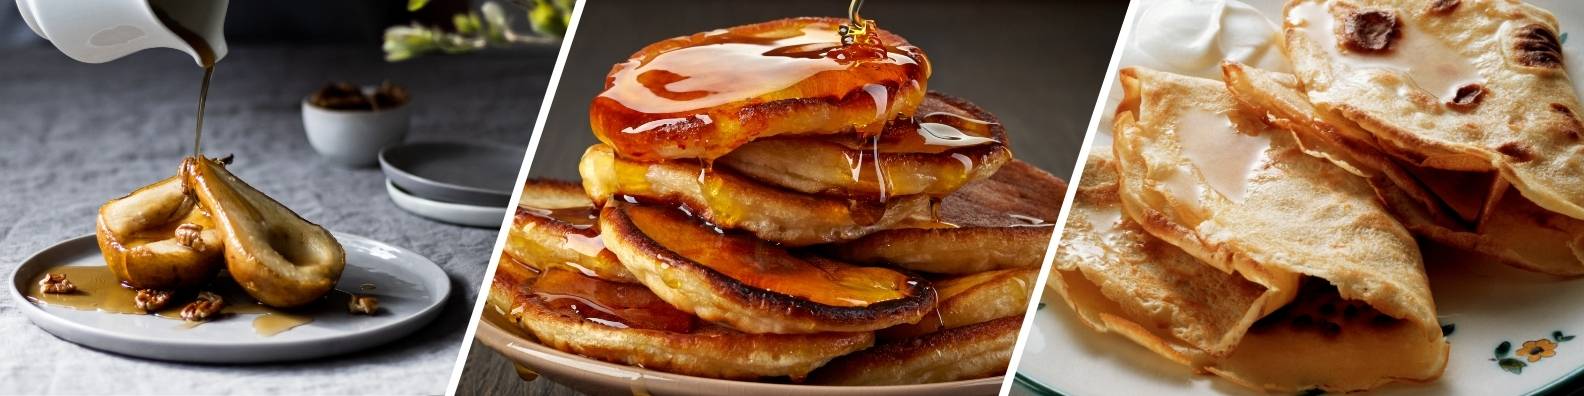 The Many Uses of Maple Syrup